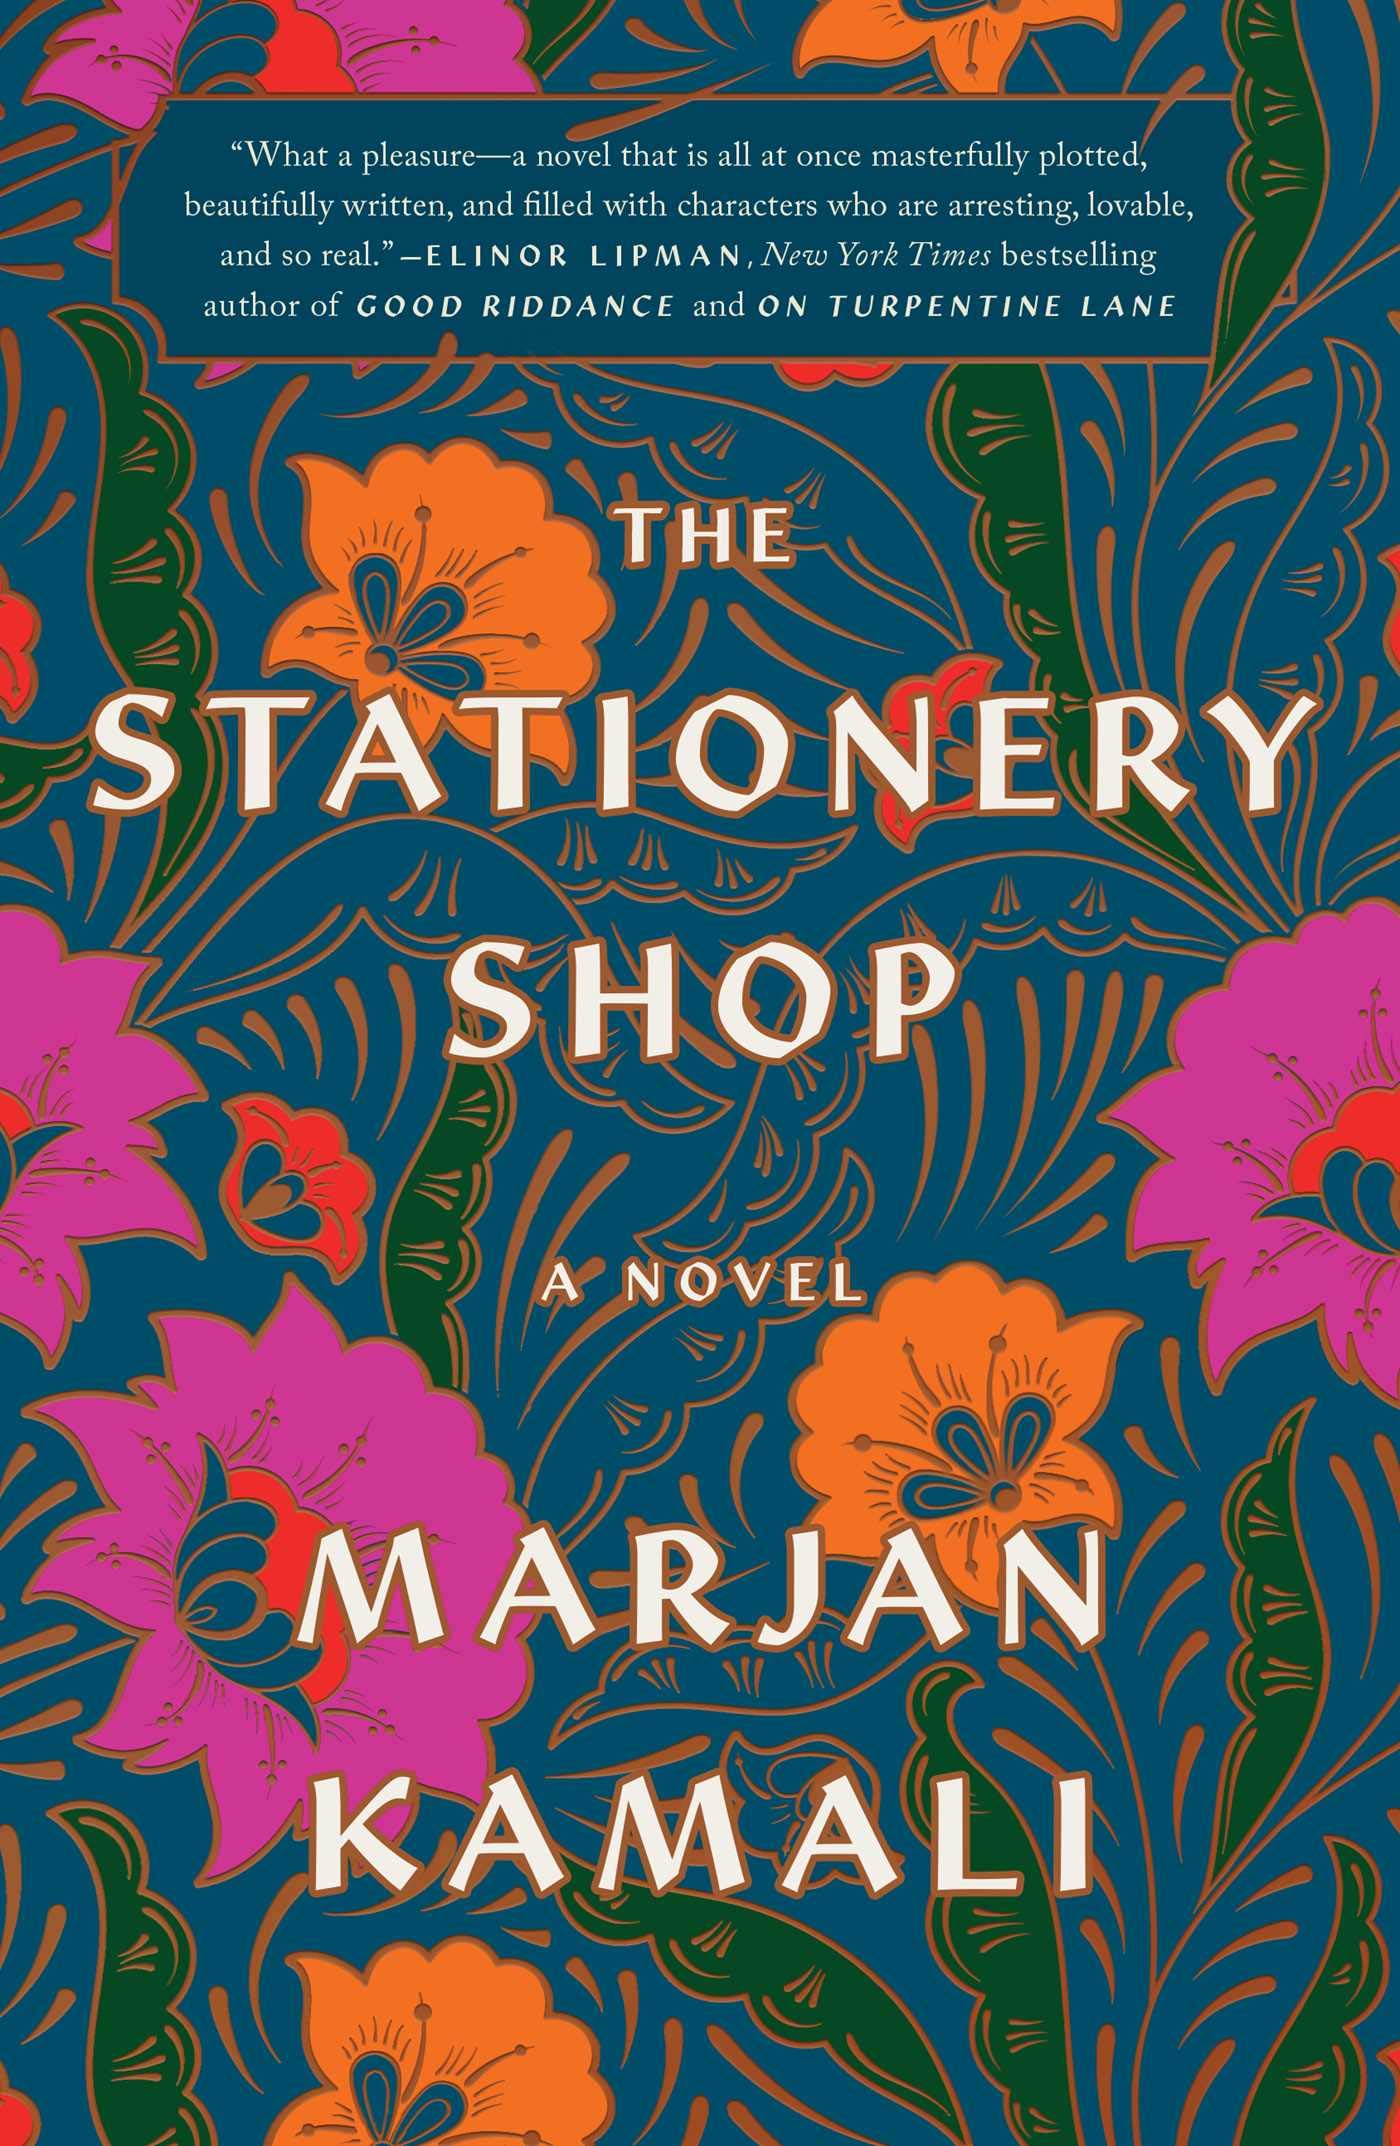 cover of the book "The Stationery Shop" by Marjan Kamali featuring art of pink and orange flowers on a blue background